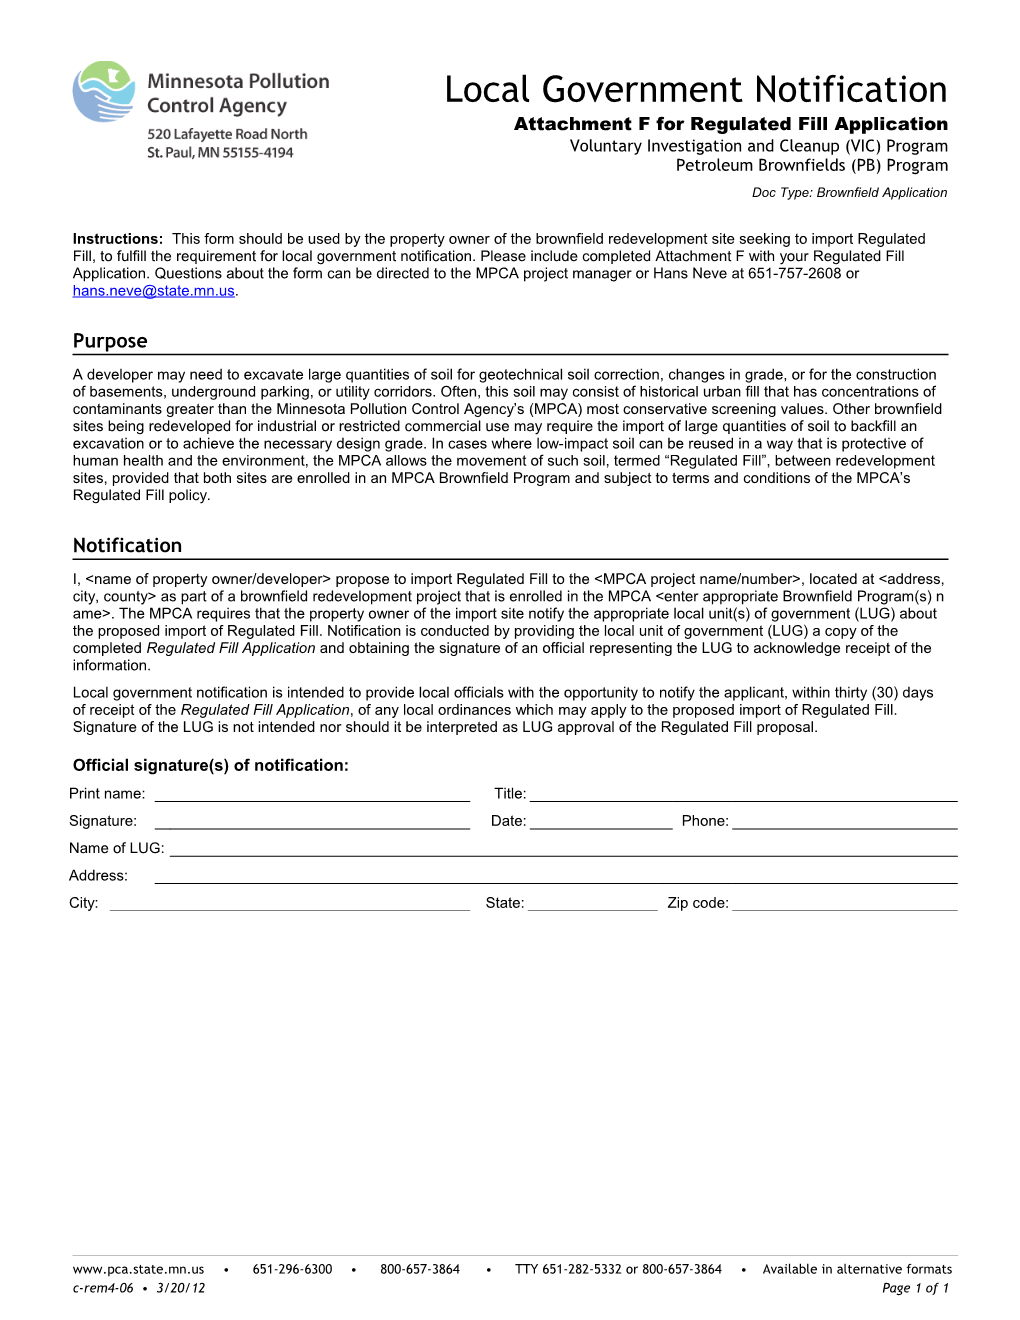 Local Government Notification - Att F for Regulated Fill Application - Form